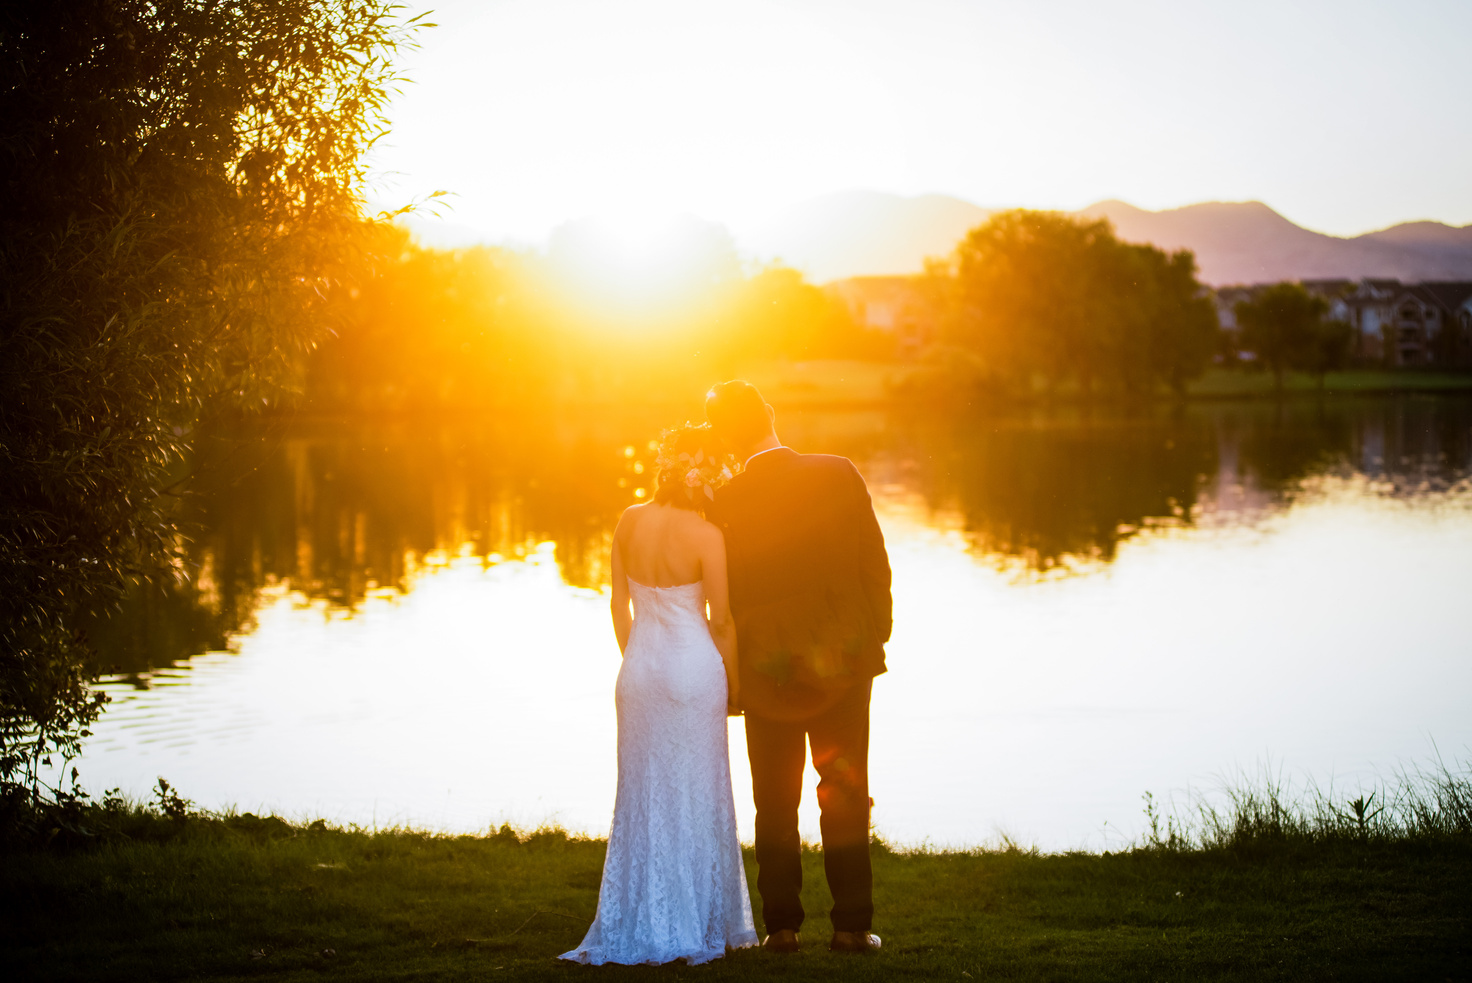 The bride and groom are standing in front of a lake at sunset.